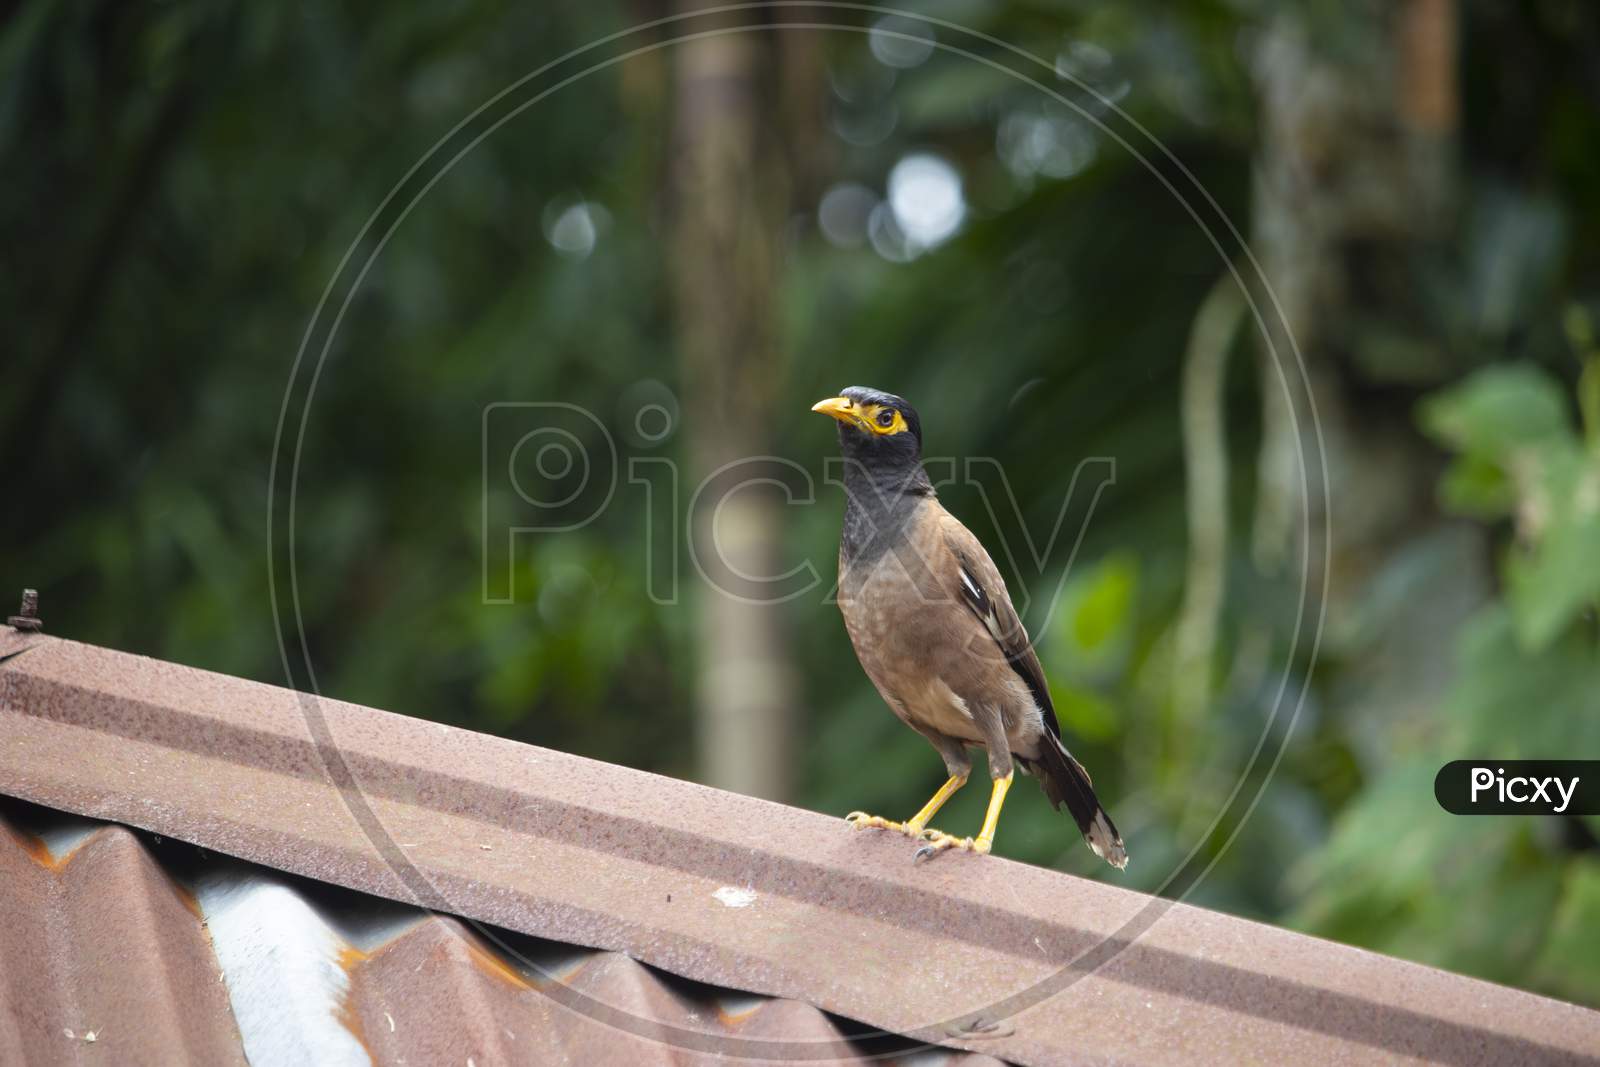 Mynah Is Standing On Tin Shed House And Looking Somethings For Eat. Common Myna Finding Food.The Common Myna Or Indian Myna In Bangladesh,Asia.Back Side And Font Side Of Myna.Acridotheres.Wildlife